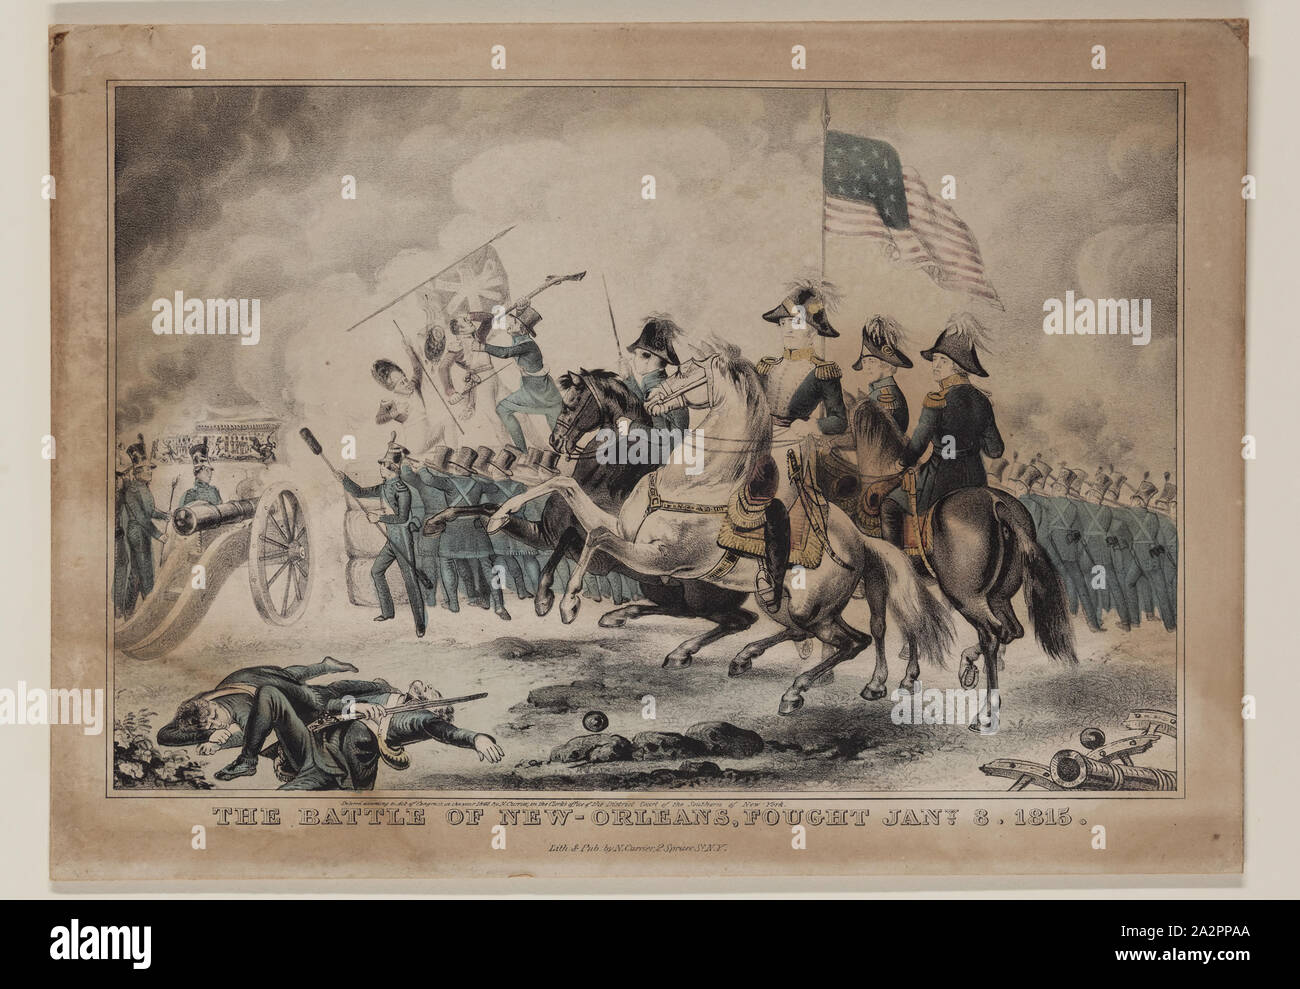 The Battle of New Orleans, Fought January 8, 1815, 1842, lithograph printed in black ink, colored by hand on wove paper, Image: 8 3/8 × 12 1/2 inches (21.3 × 31.8 cm Stock Photo